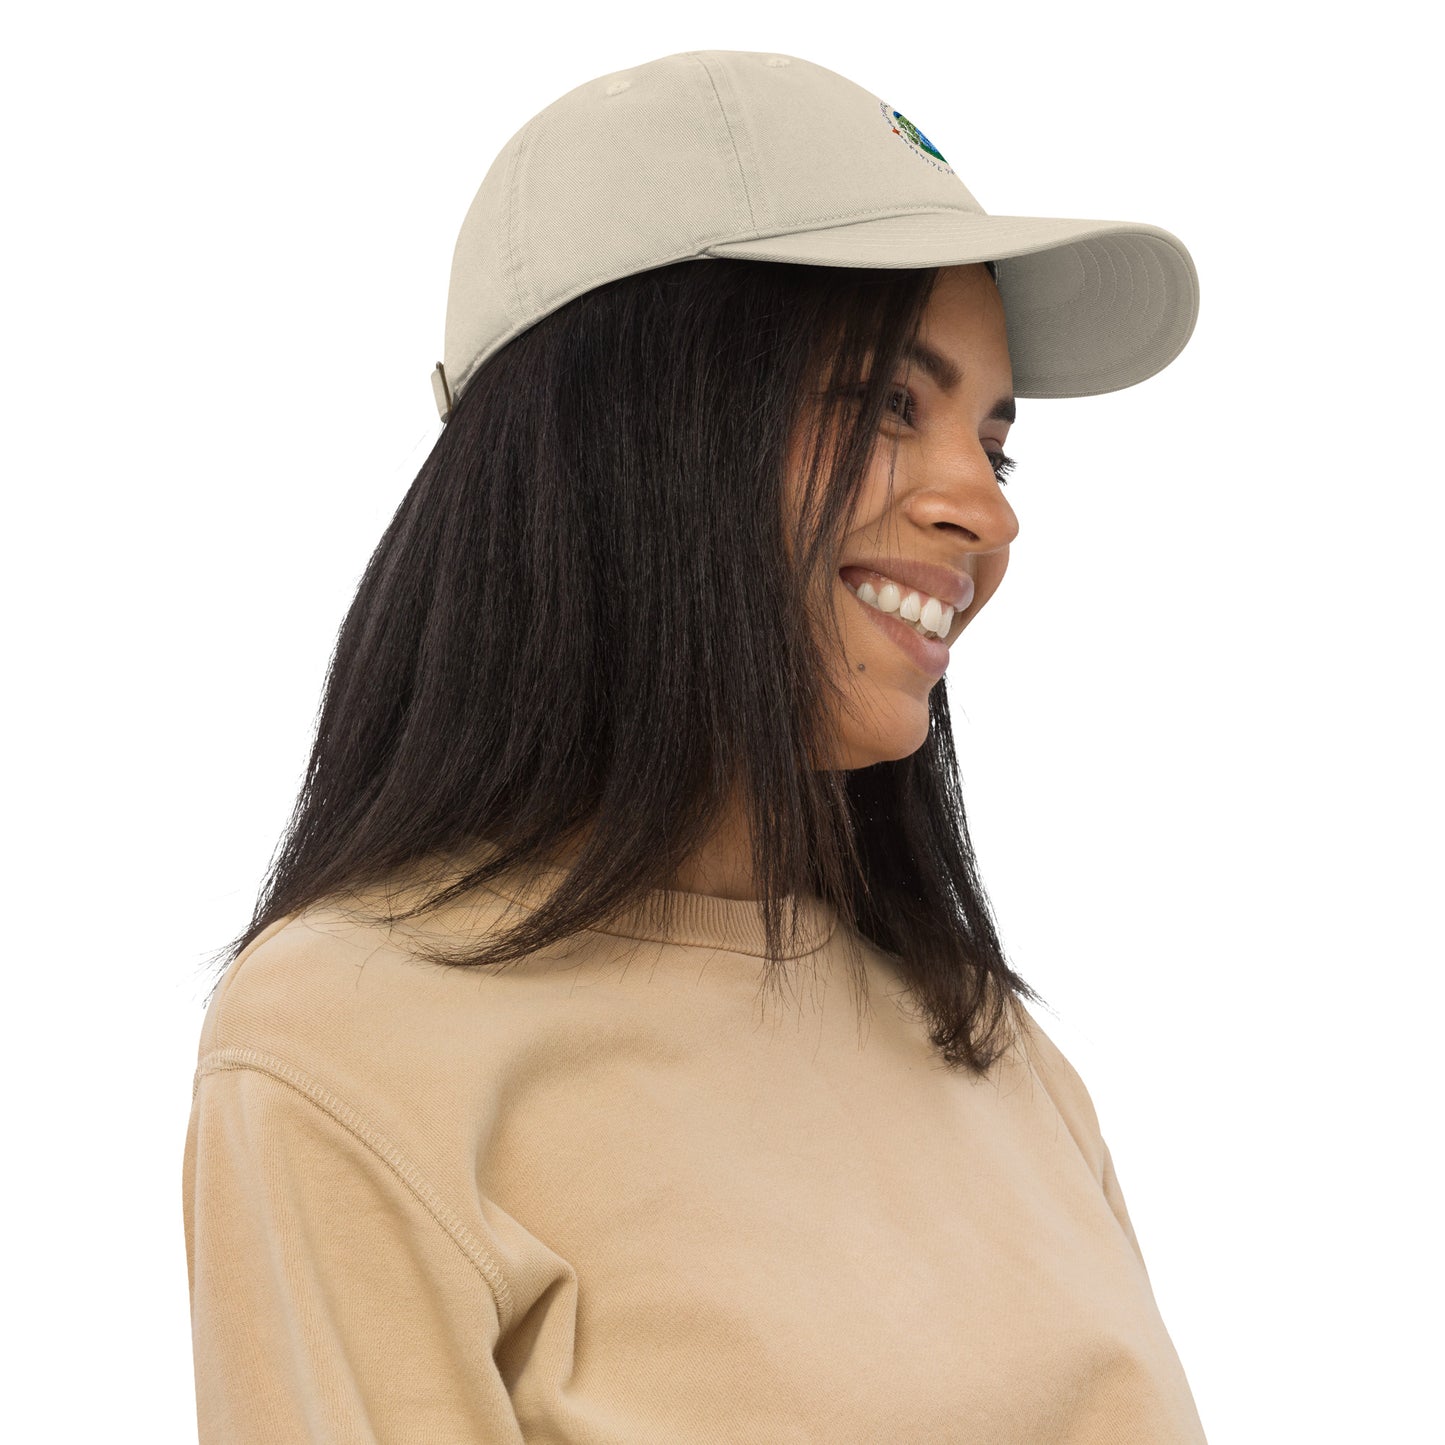 Infinite Potential 888 Angel Number Organic Cotton dad hat